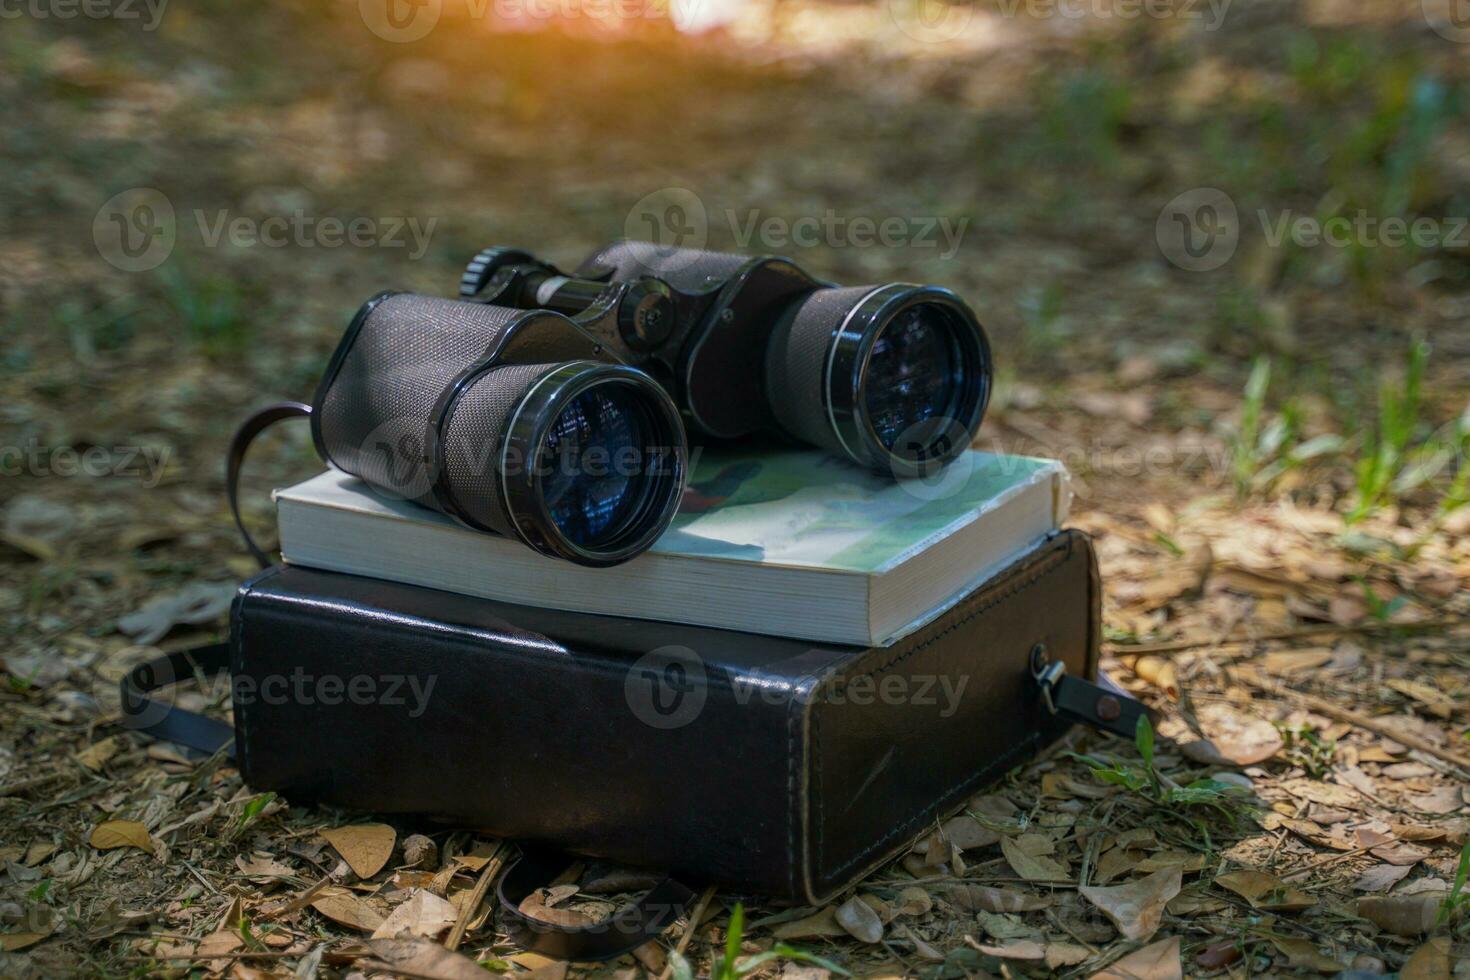 Binoculars, birdwatching guide book and case laying on the ground in the forest It is a device for bird watching, animal viewing, and studying living things in the forest. Soft and selective focus. photo